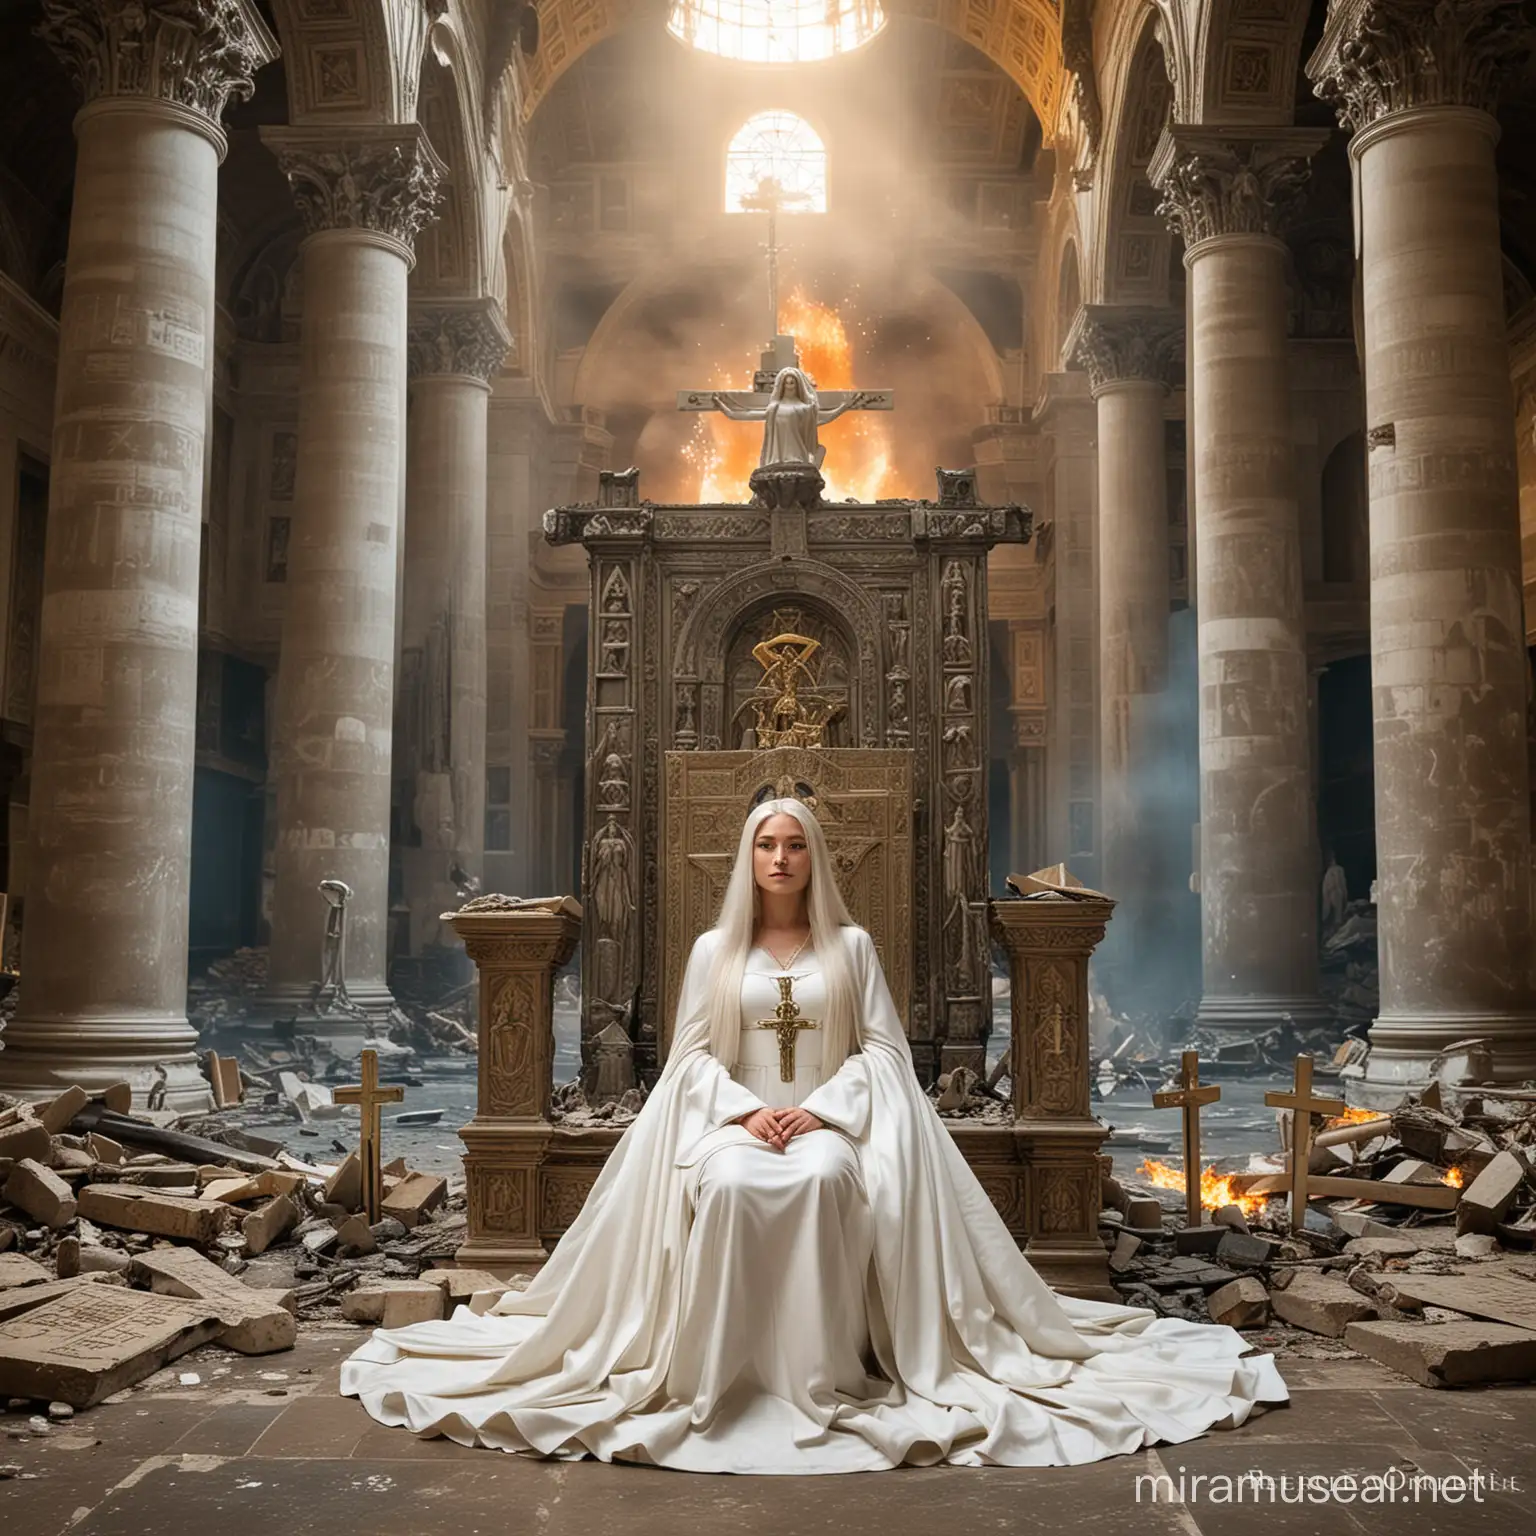 Rebecca the Omen Empress Goddess in Vatican Ruins Amidst Worship and Cataclysm